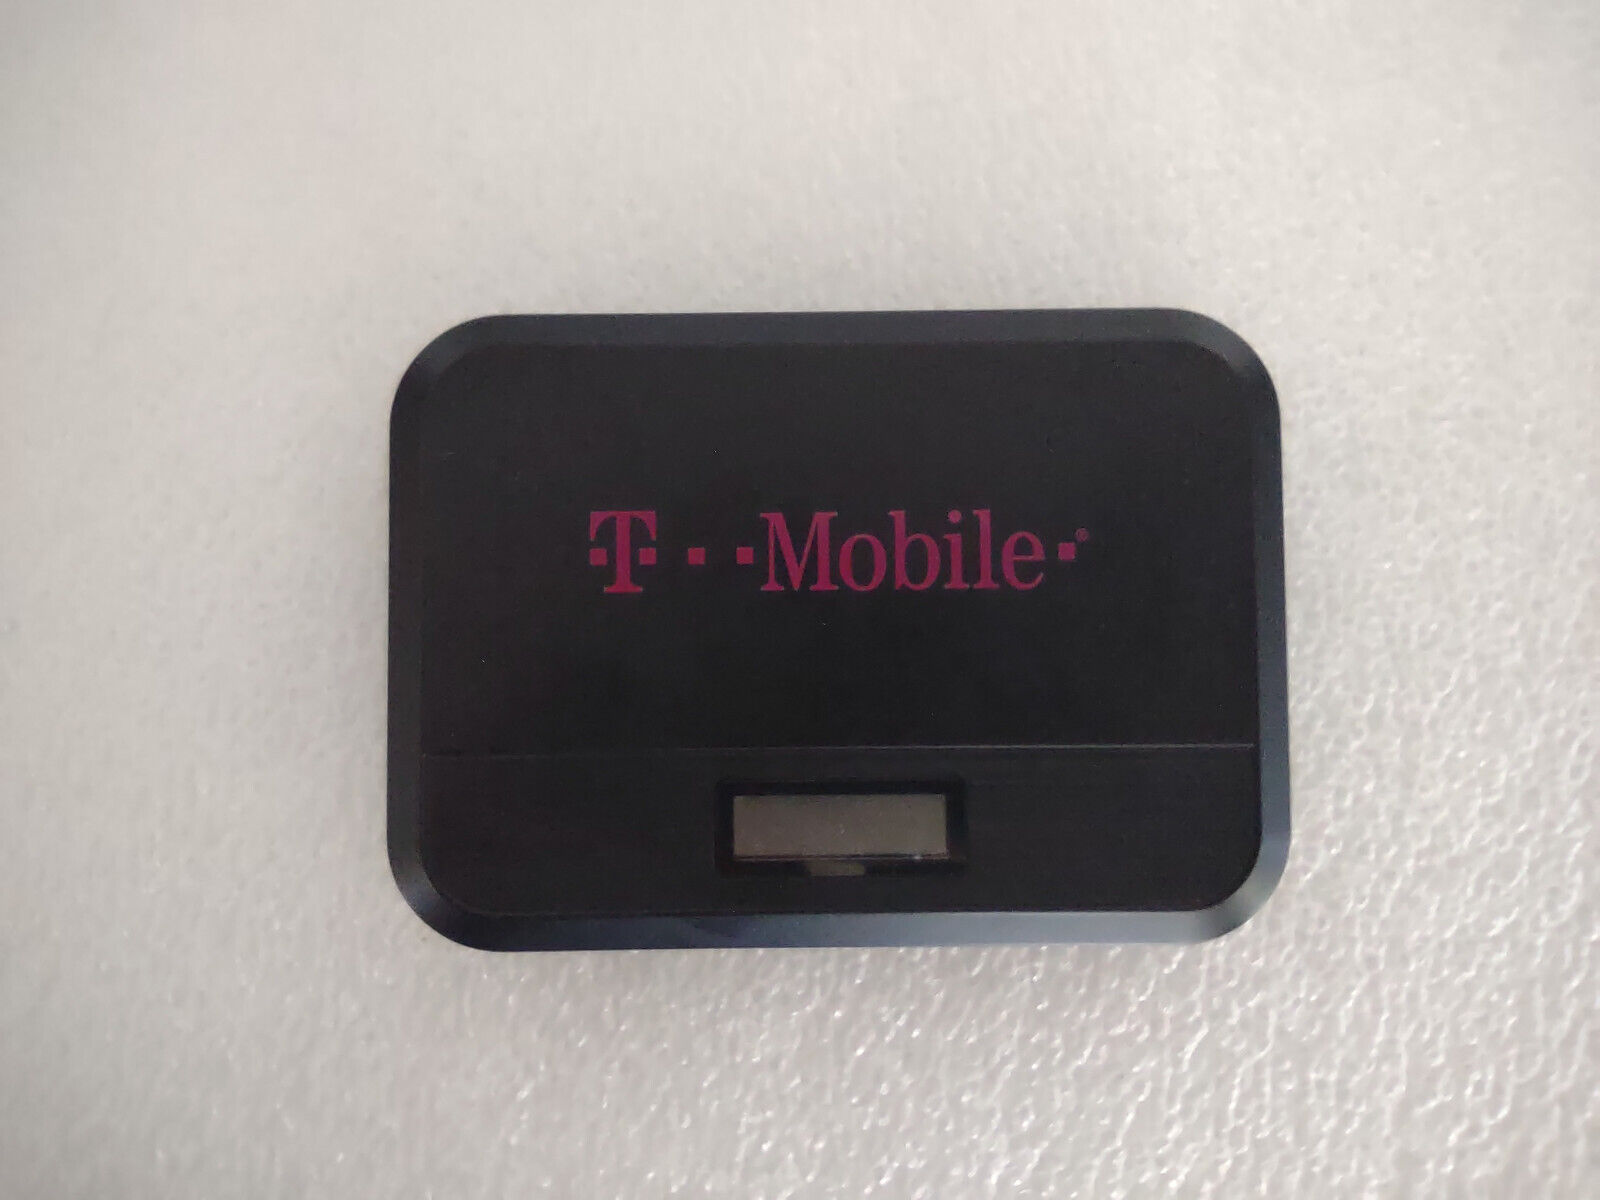 Lot of 23: T-Mobile T9 Wireless WiFi 4G LTE Mobile Hotspot w/ box and charger